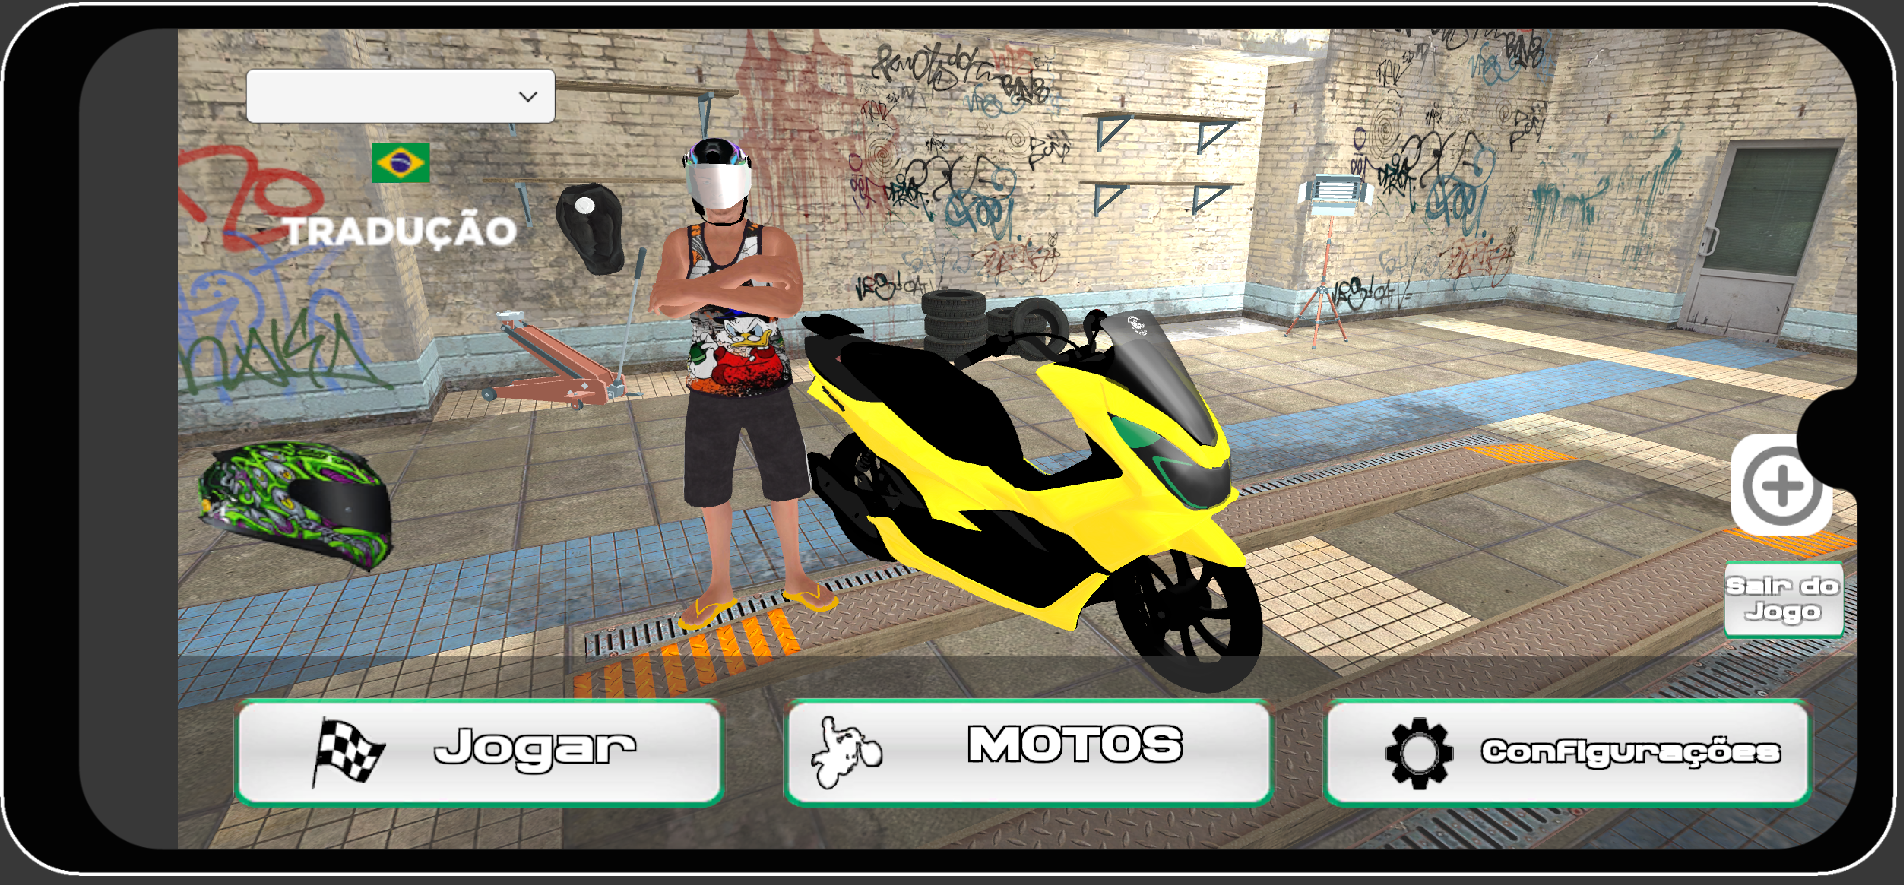 MX Grau APK for Android Download